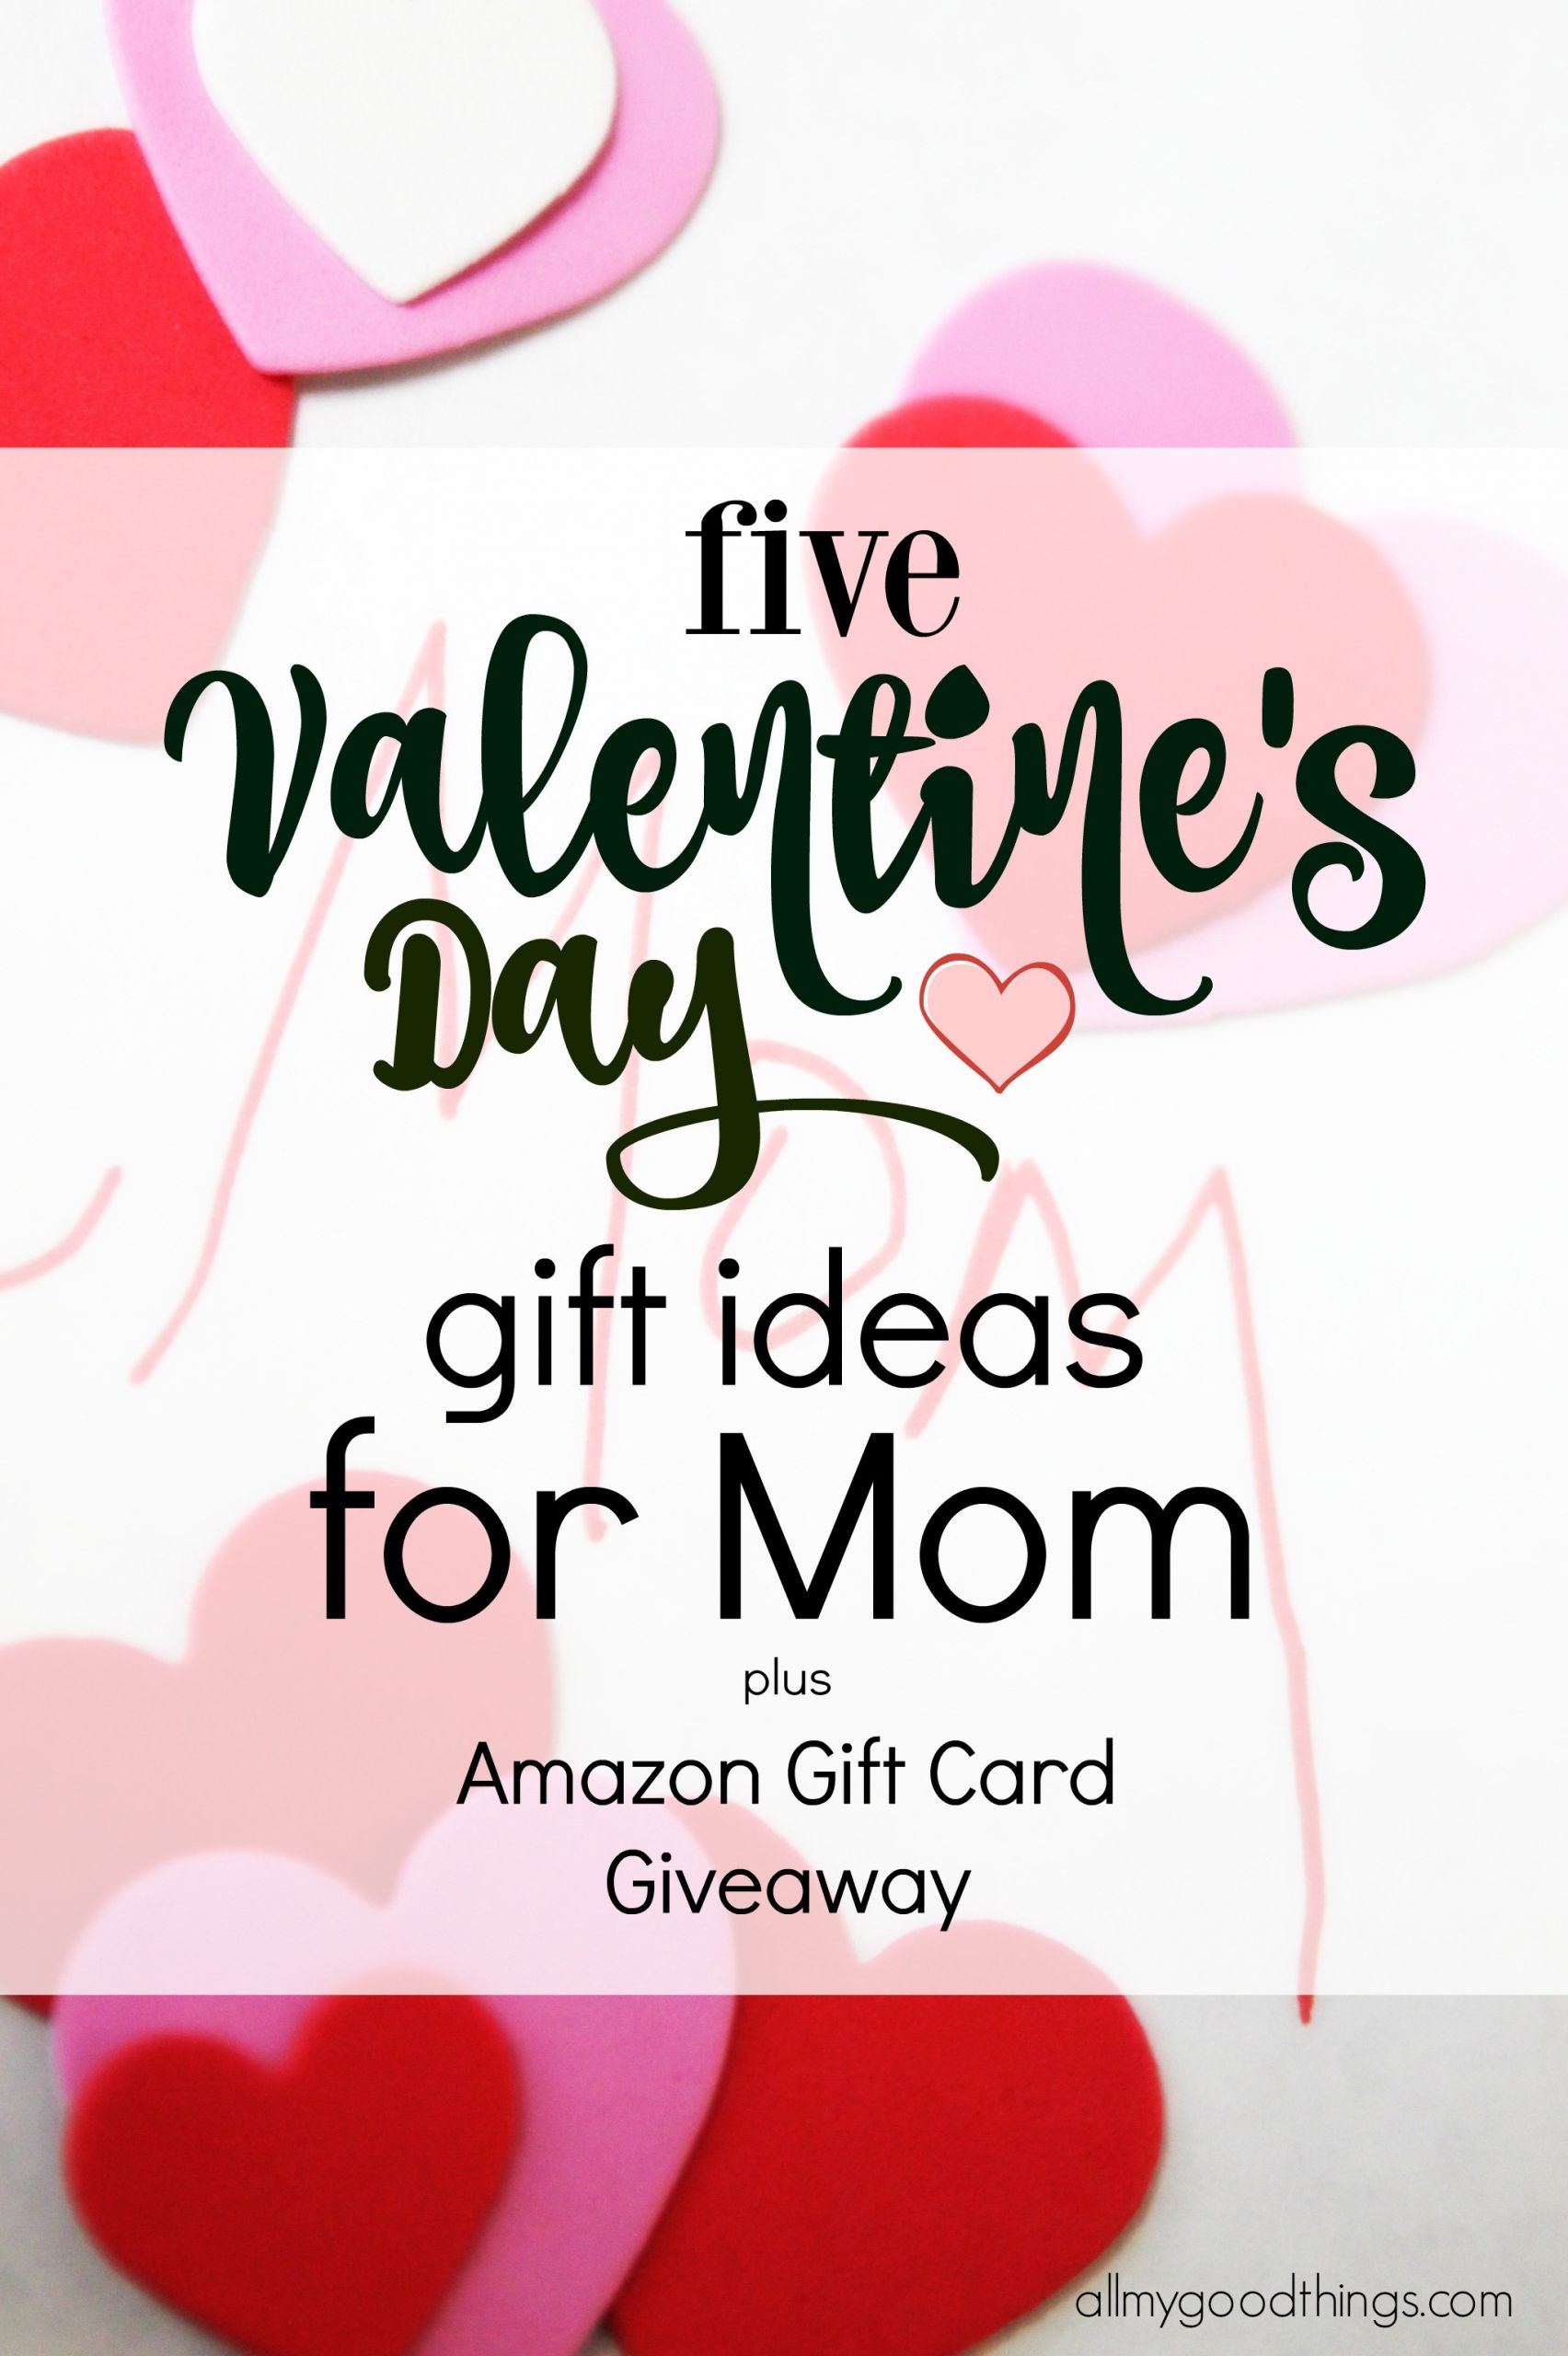 Valentines Day Gifts For Mom
 Five Valentine s Day Gift Ideas for Mom and Amazon Gift